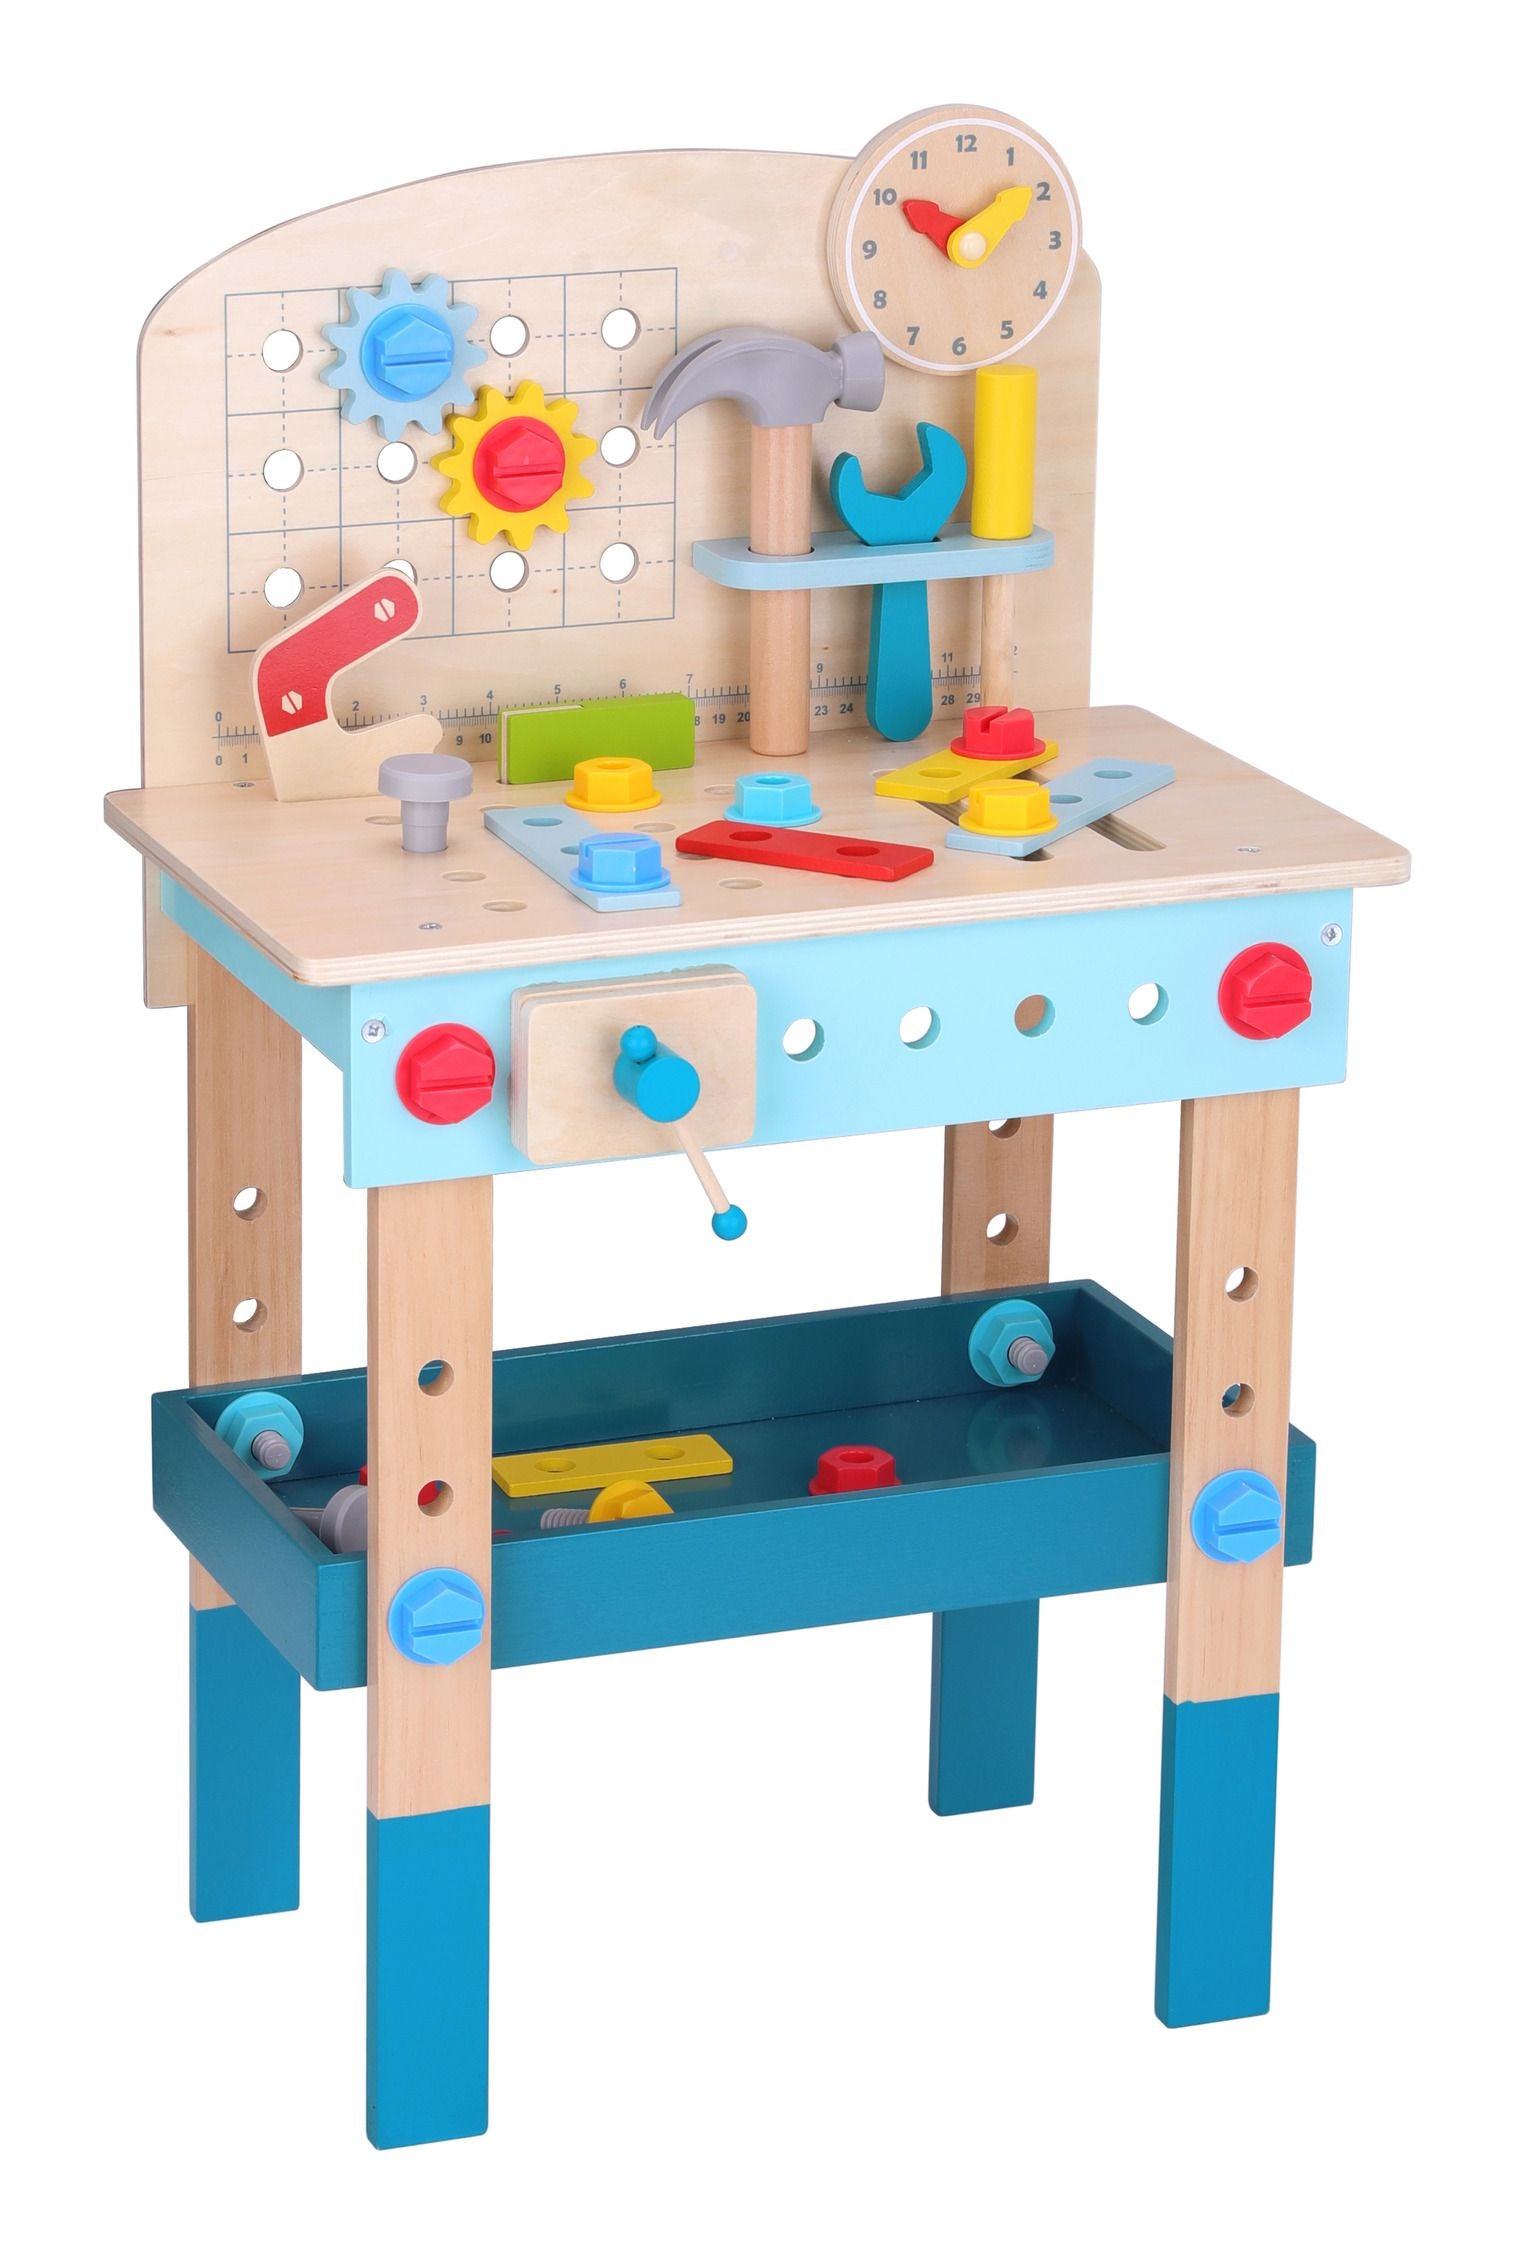 Wooden Work Bench by Tooky Toy Builders PlaySet